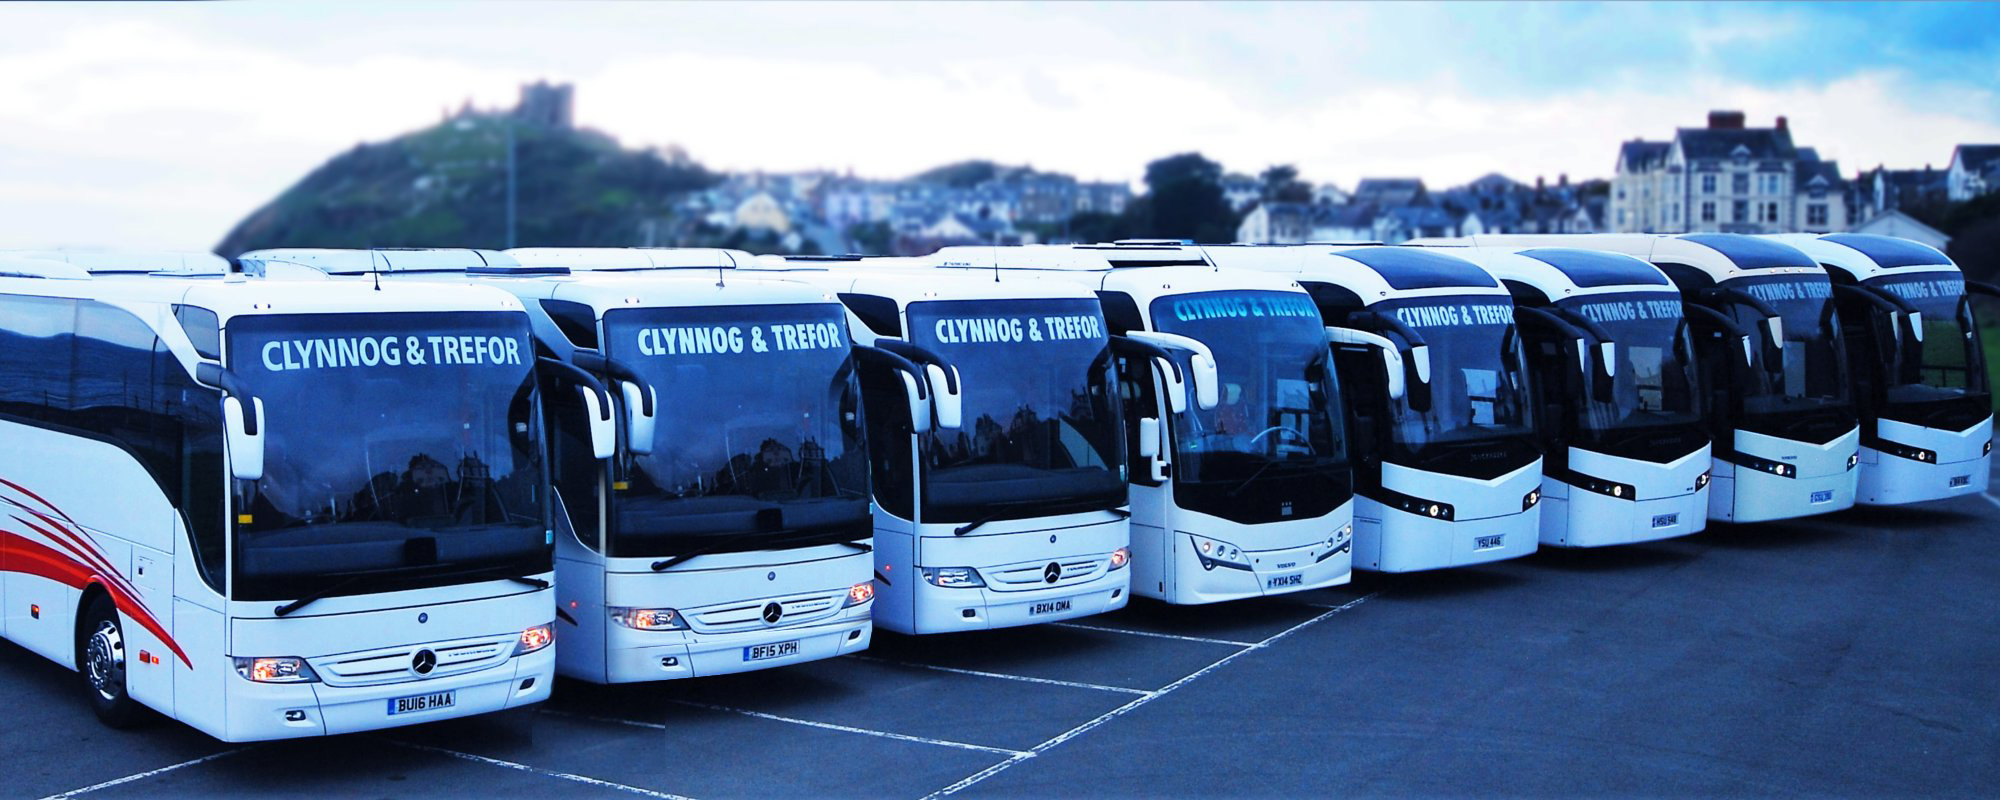 Coach Hire for Schools, colleges & universities